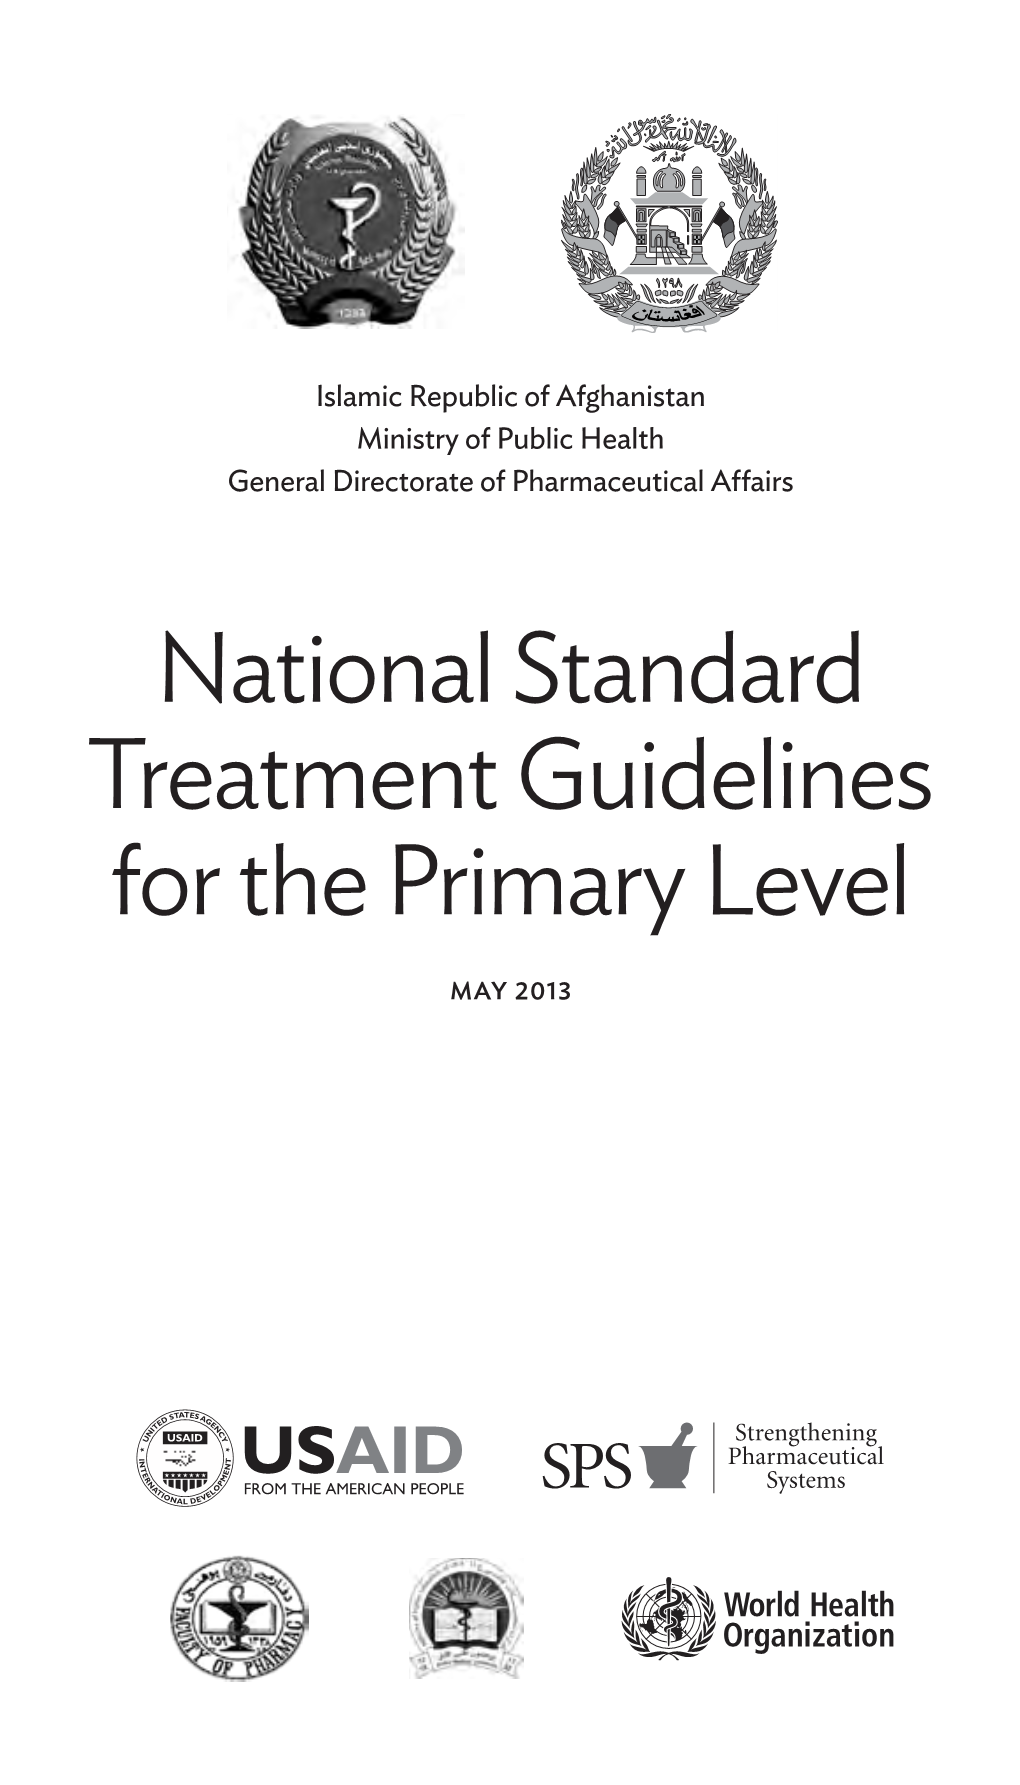 National Standard Treatment Guidelines for the Primary Level